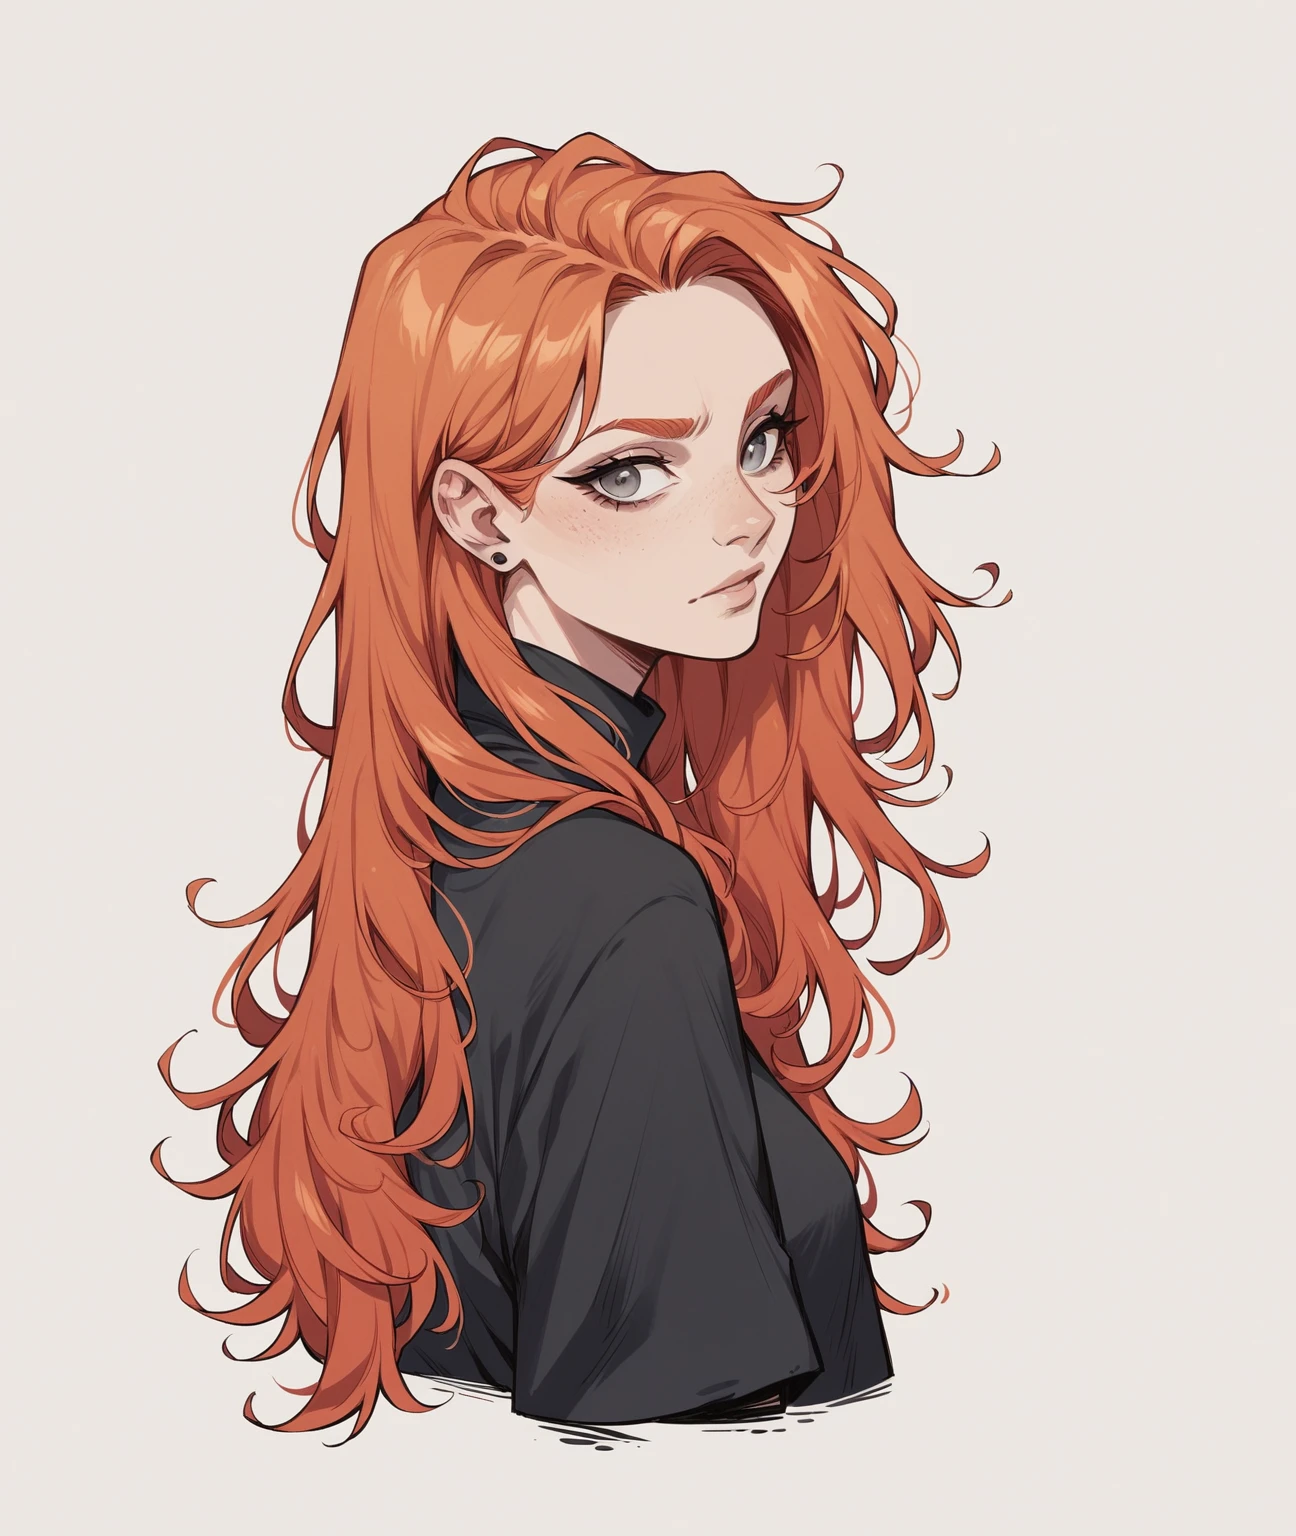 score_9, score_8_up, score_7_up, score_6_up, w00f, simple background, 1woman, a drawing of a woman with long hair and a black shirt, half body, ginger hair, grey eyes, frearkles